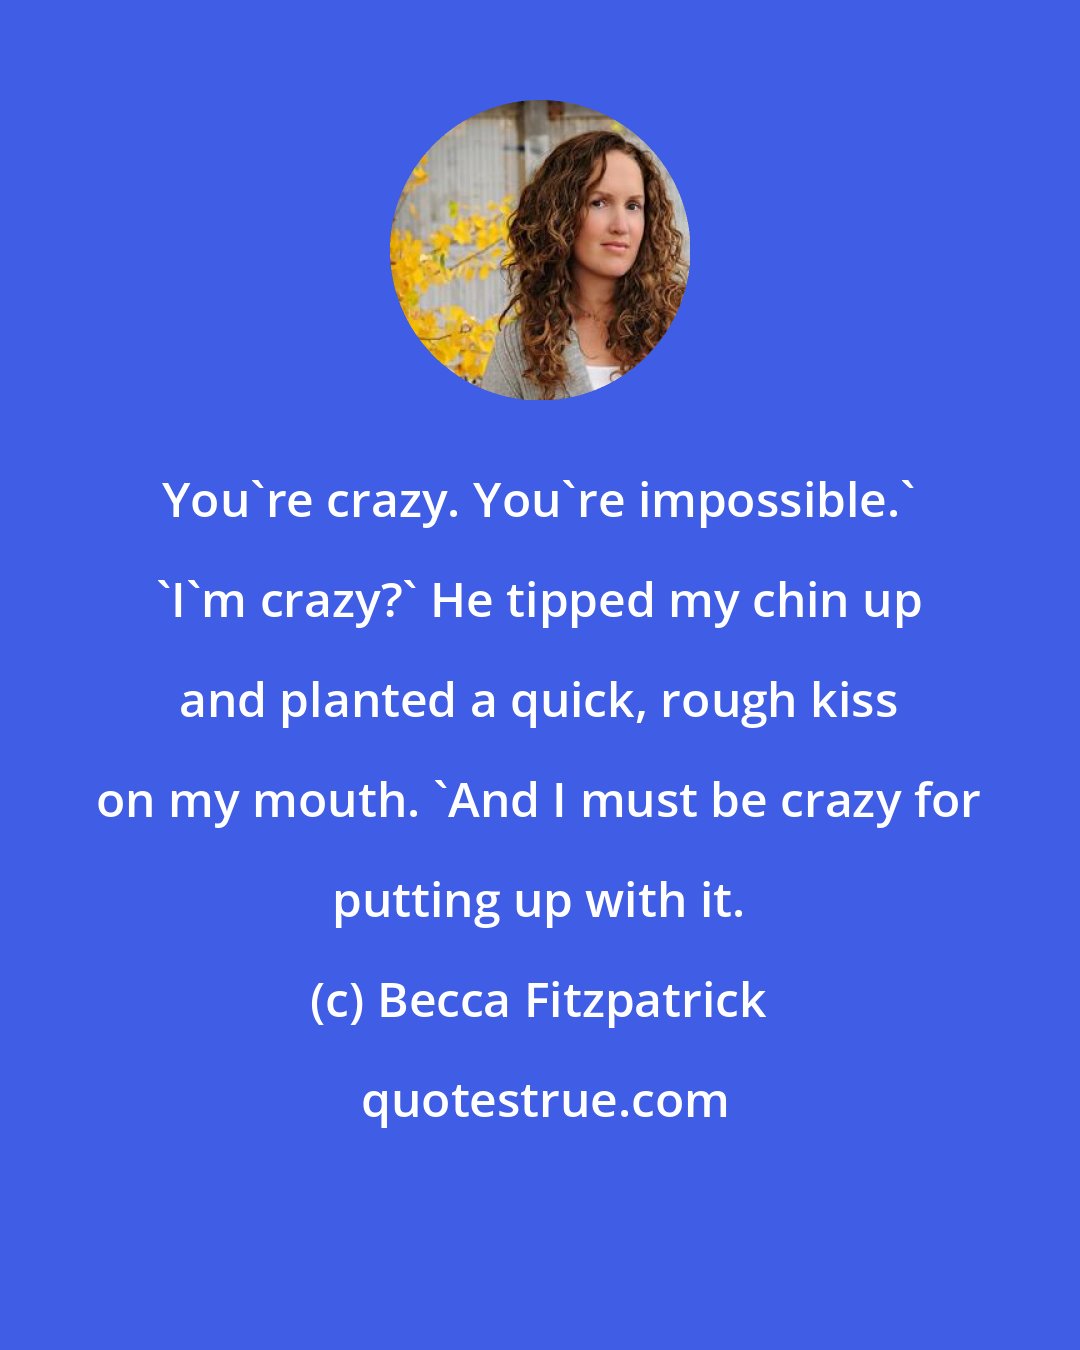 Becca Fitzpatrick: You're crazy. You're impossible.' 'I'm crazy?' He tipped my chin up and planted a quick, rough kiss on my mouth. 'And I must be crazy for putting up with it.